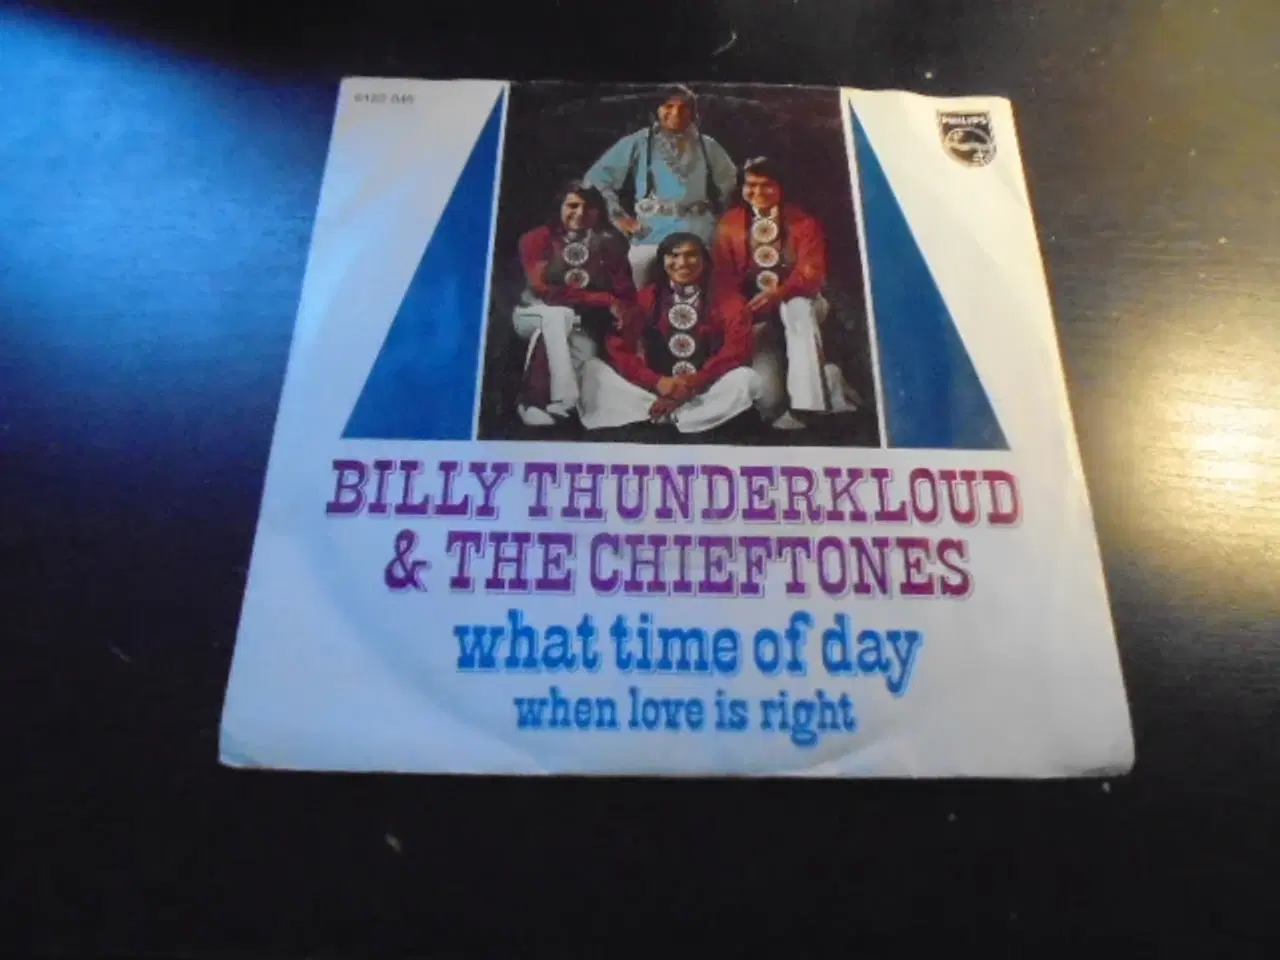 Billede 1 - Single: Billy Thundercloud & the Chieftones  